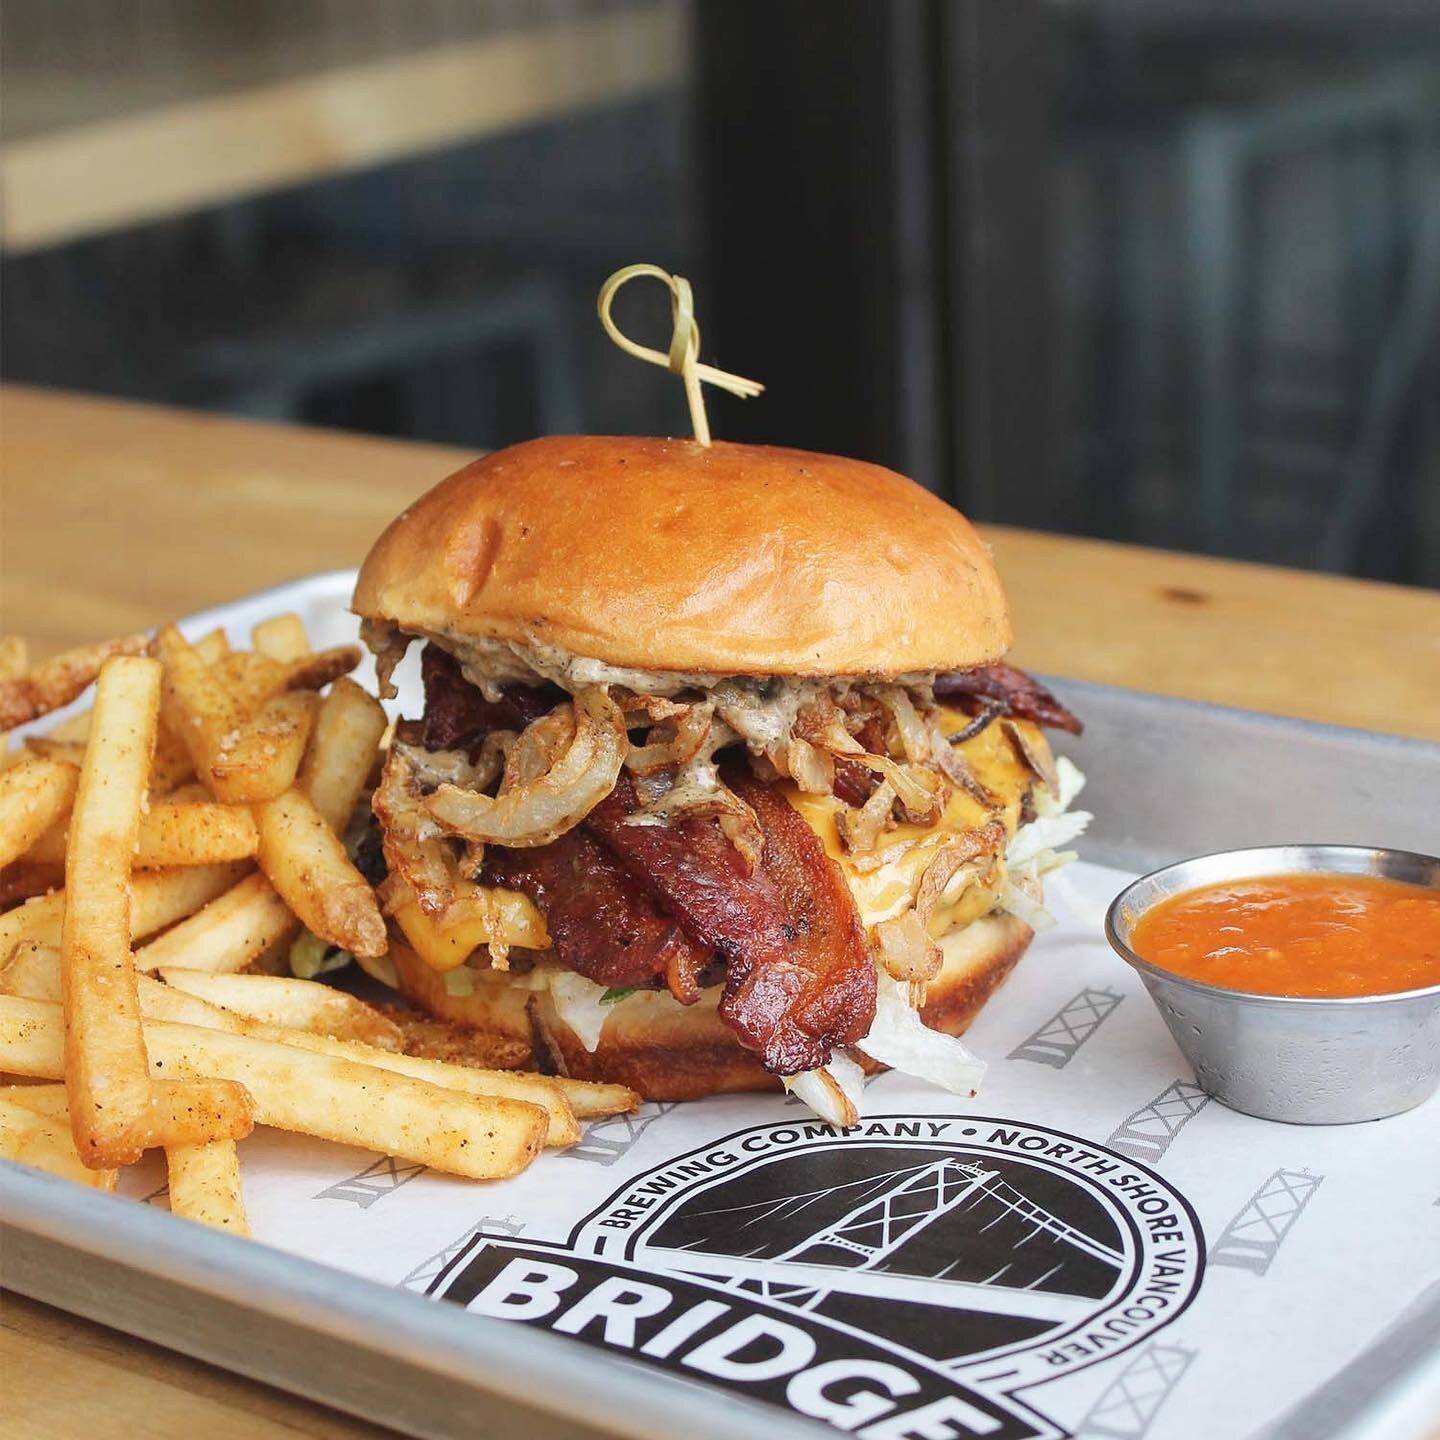 I said goddamn! Introducing our newest burger feature: The Peppercorn Royale with Cheese. @tworiversmeats patty, bacon, house made peppercorn cream sauce, iceberg lettuce, American cheese and crispy onions all between a toasted brioche bun. Served wi